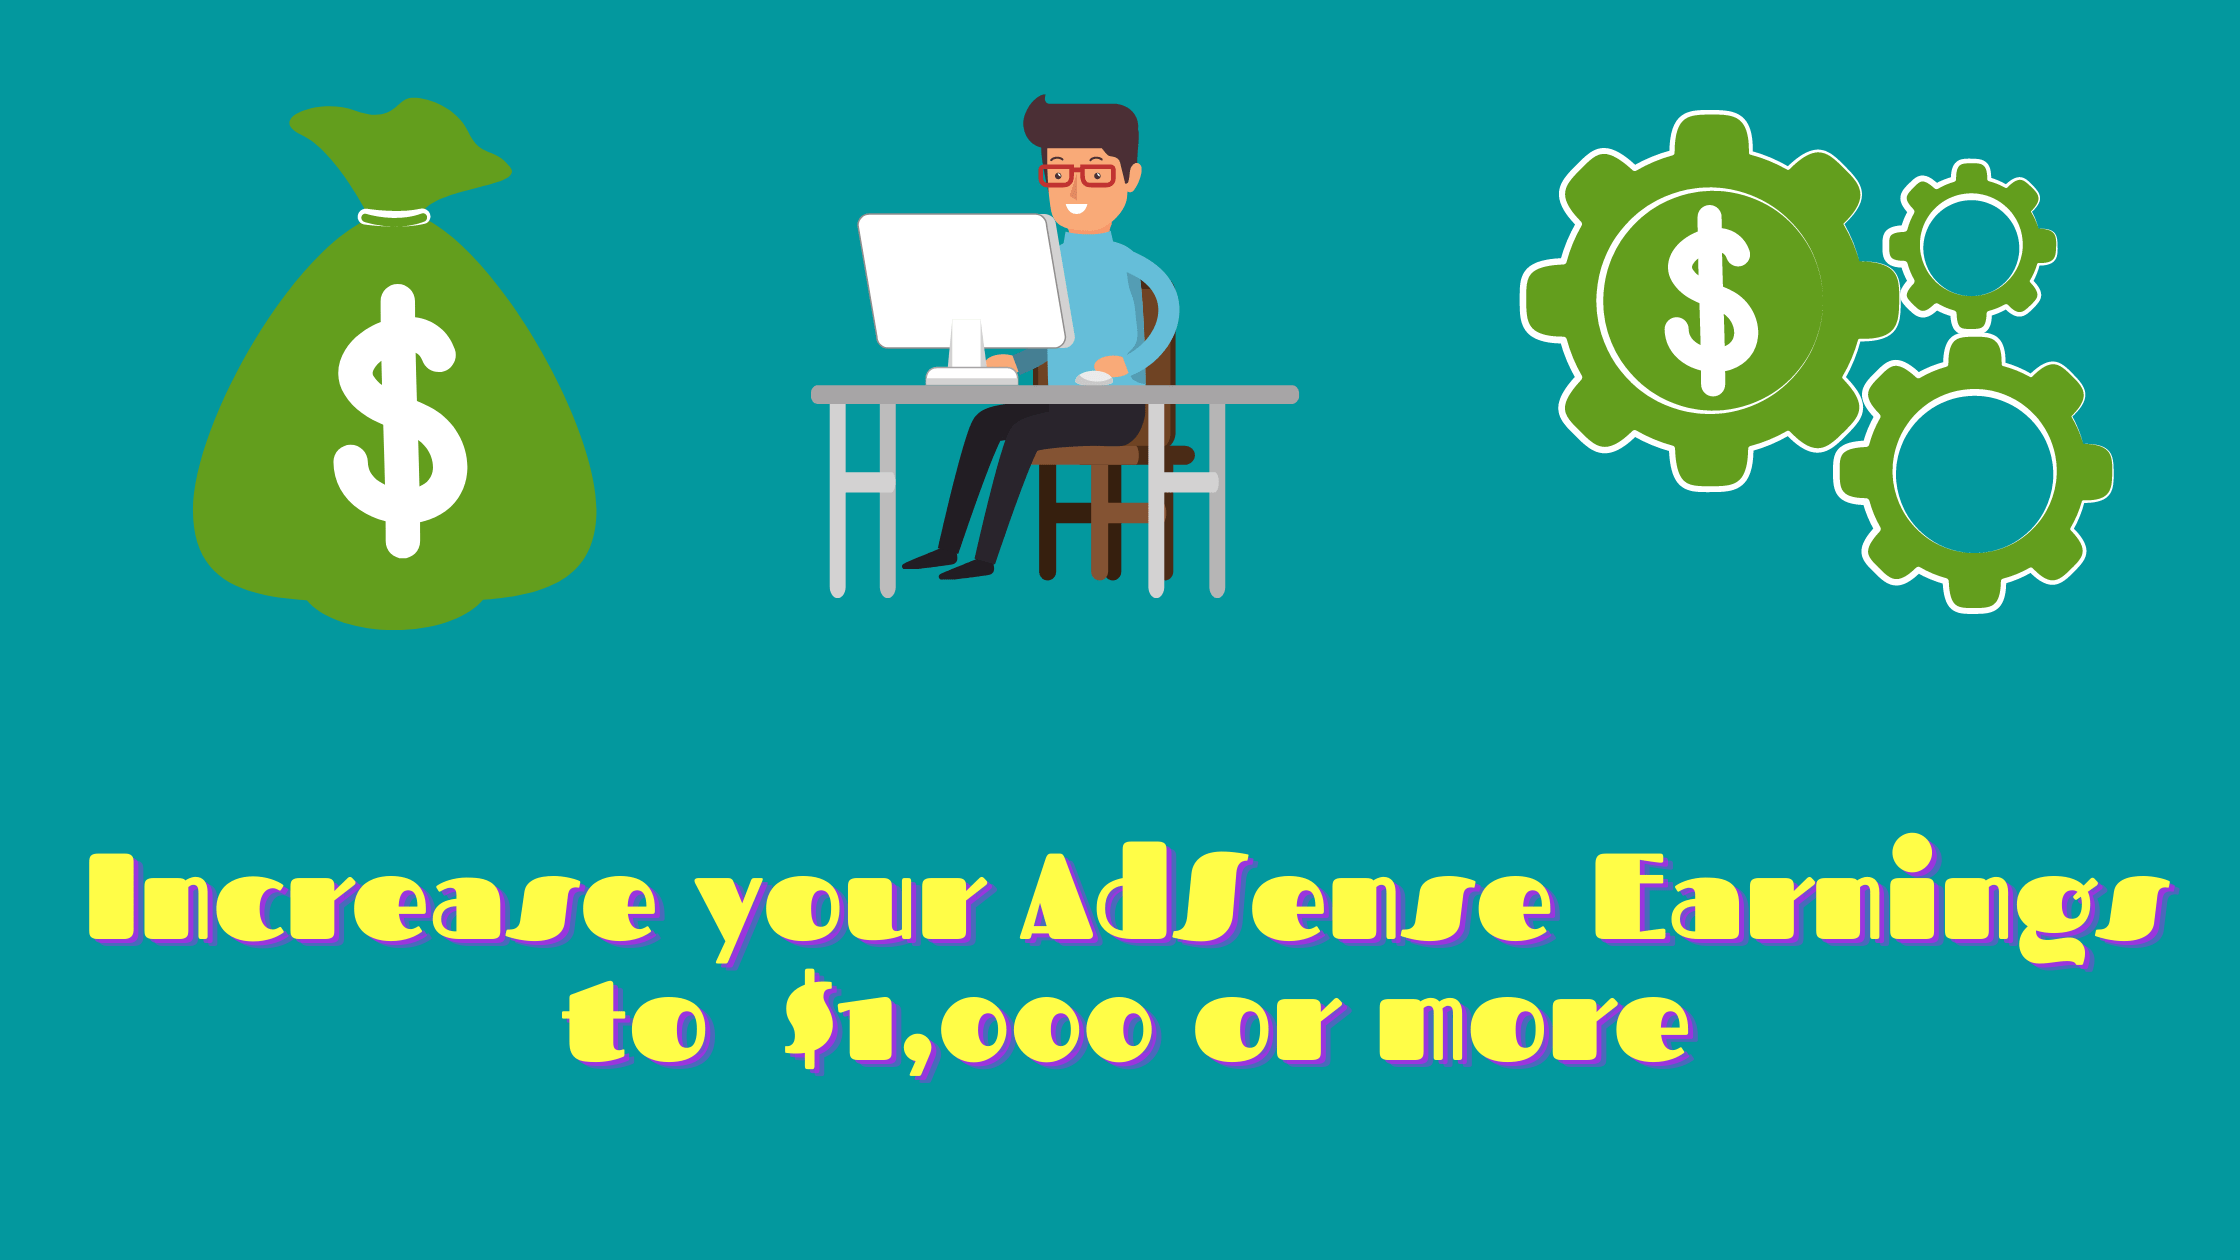 How to Increase your AdSense Earnings to Above $1,000 Per Month